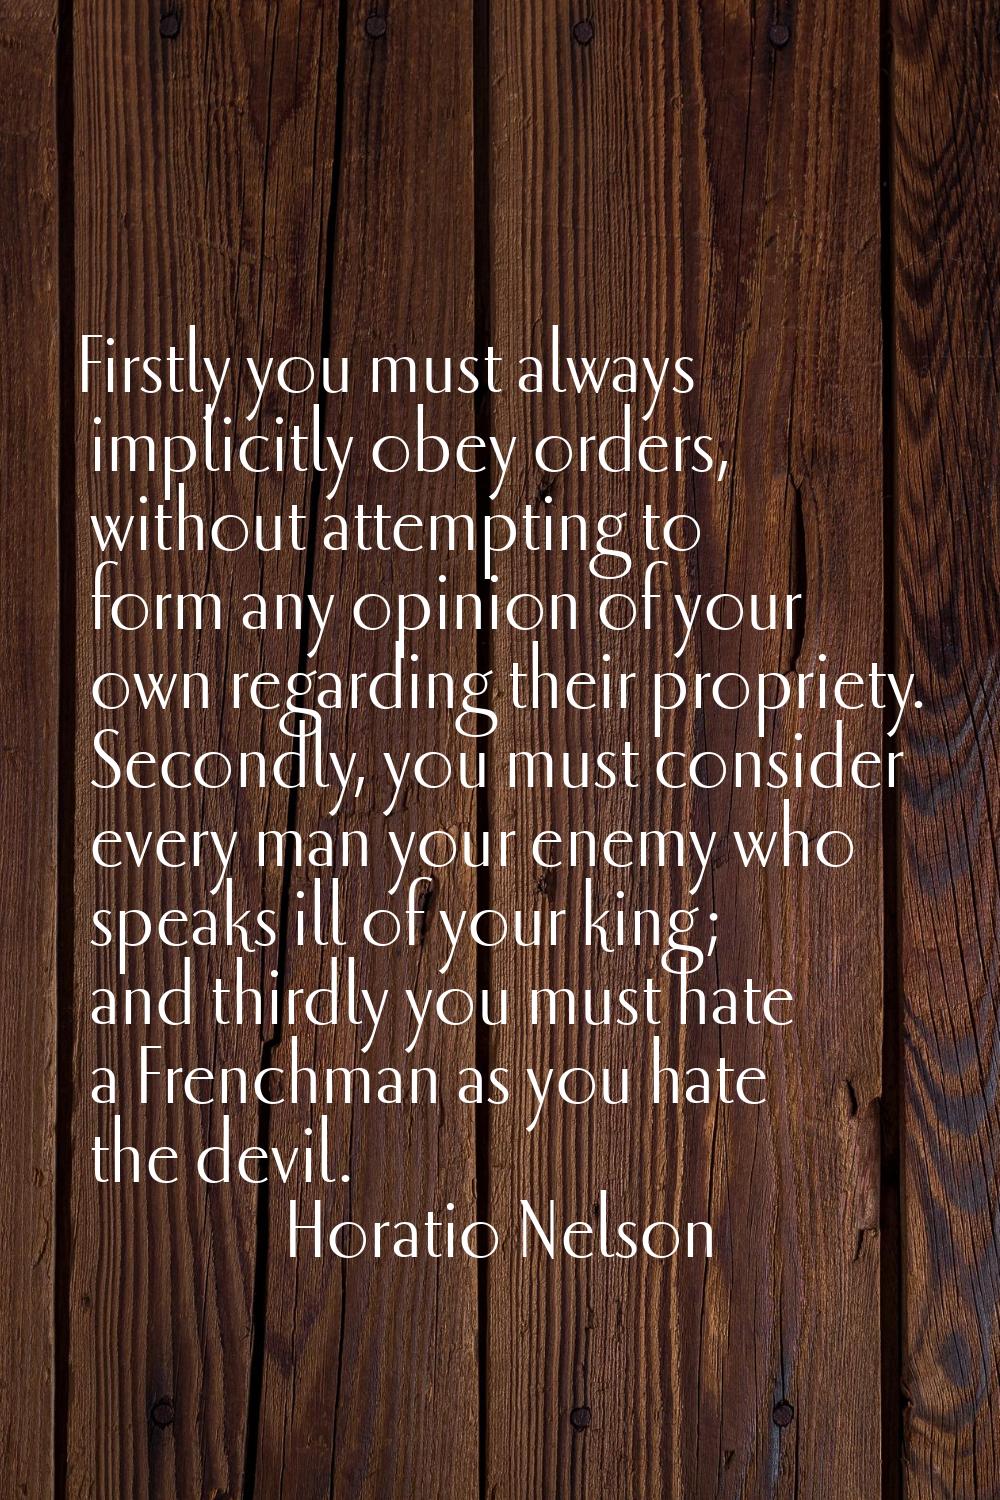 Firstly you must always implicitly obey orders, without attempting to form any opinion of your own 